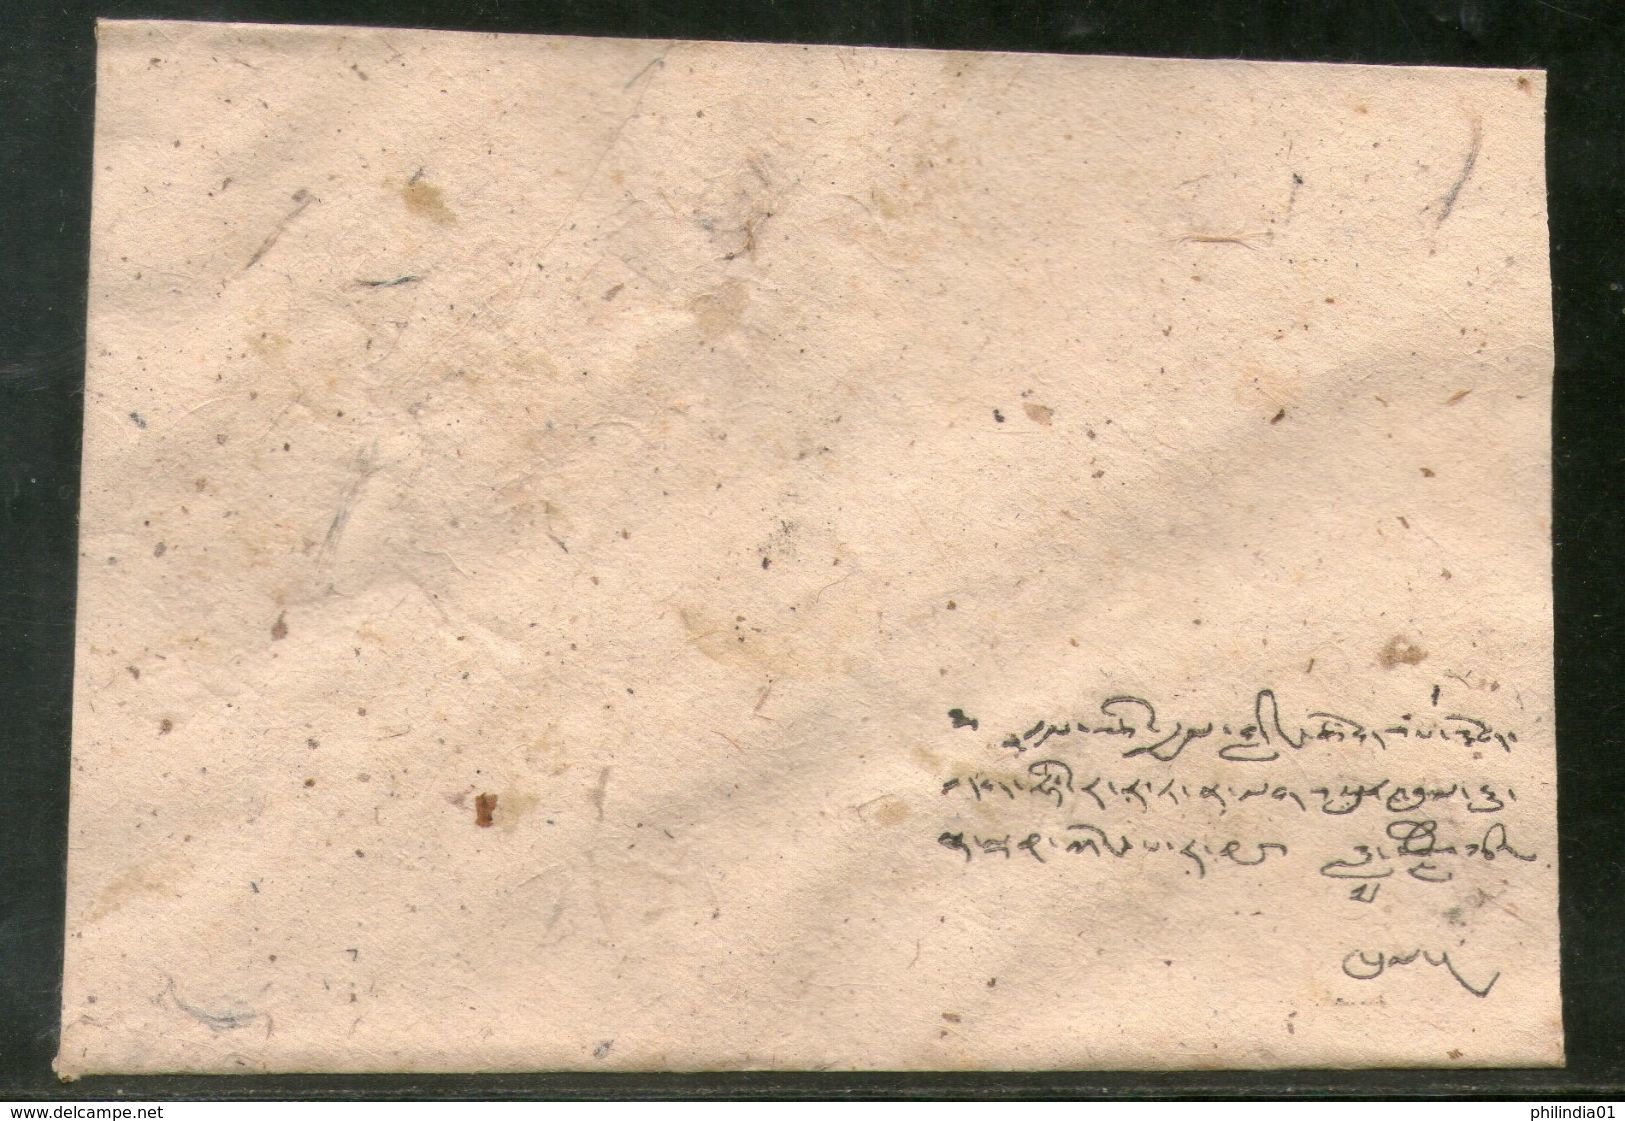 Tibet 1912-50 Facsimile Stamp Used On Native Paper Cover Good Item # 16630 - Asia (Other)